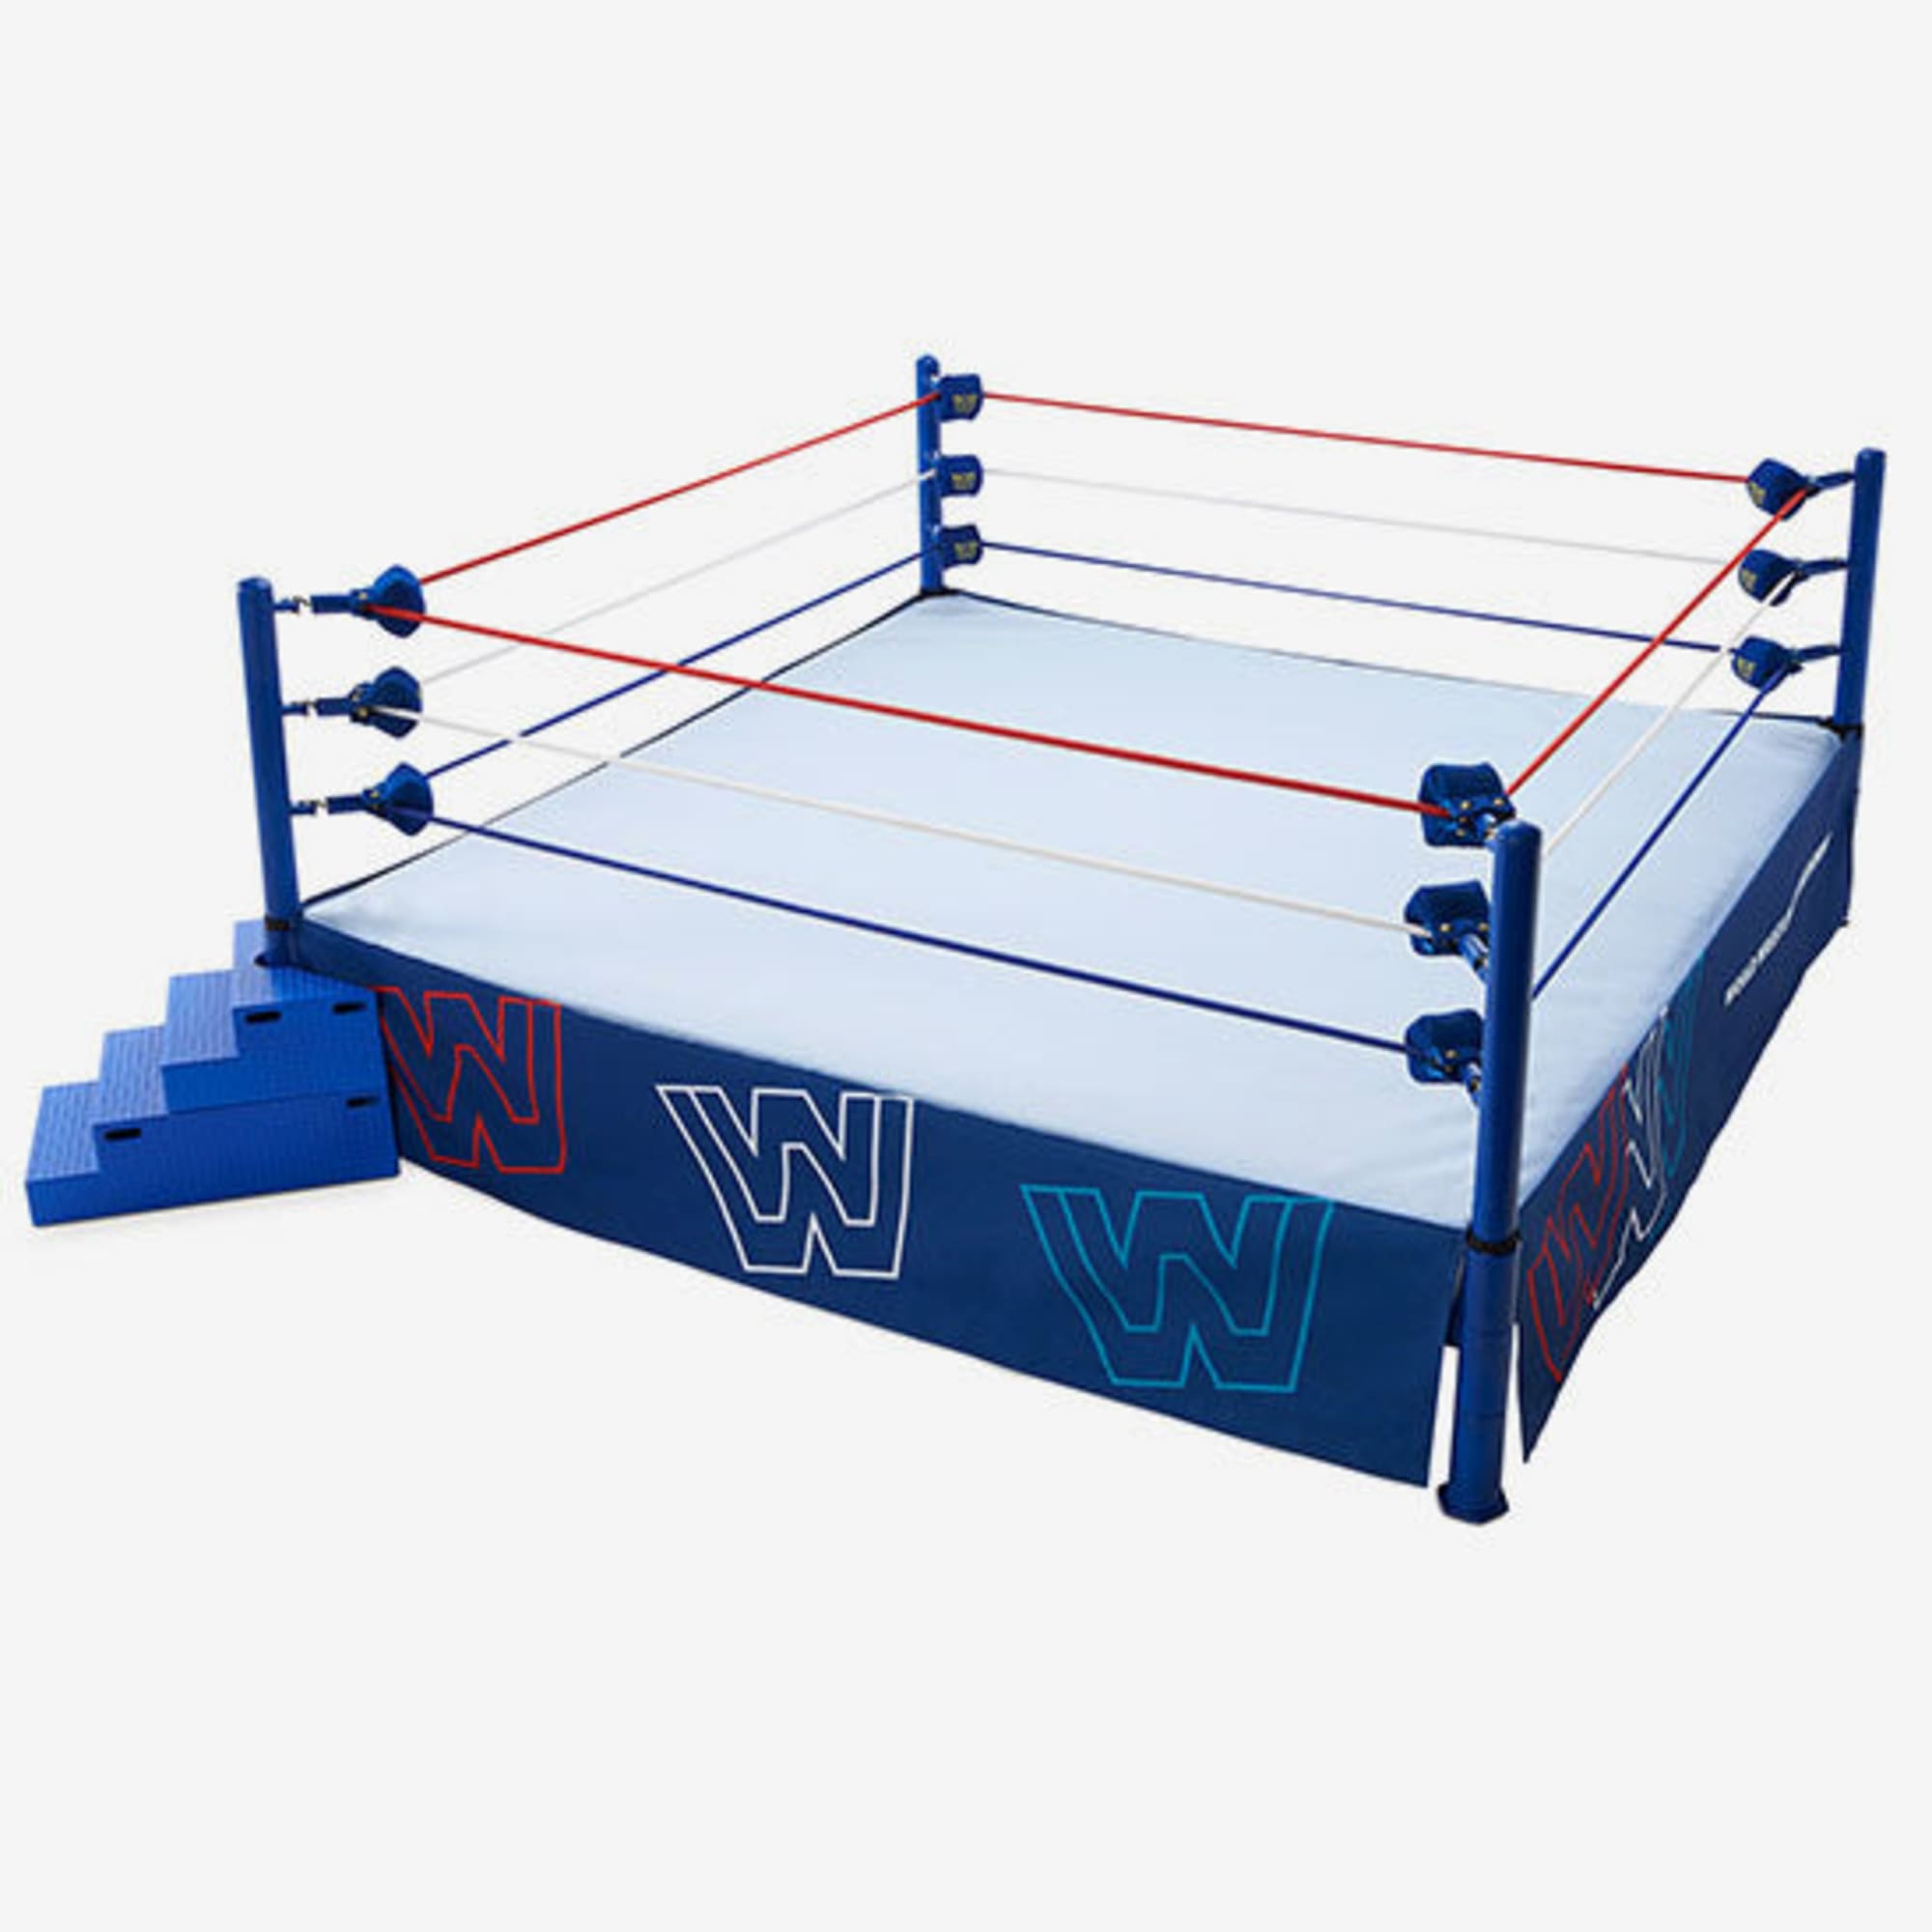 WWE® Ultimate Edition New Generation Arena